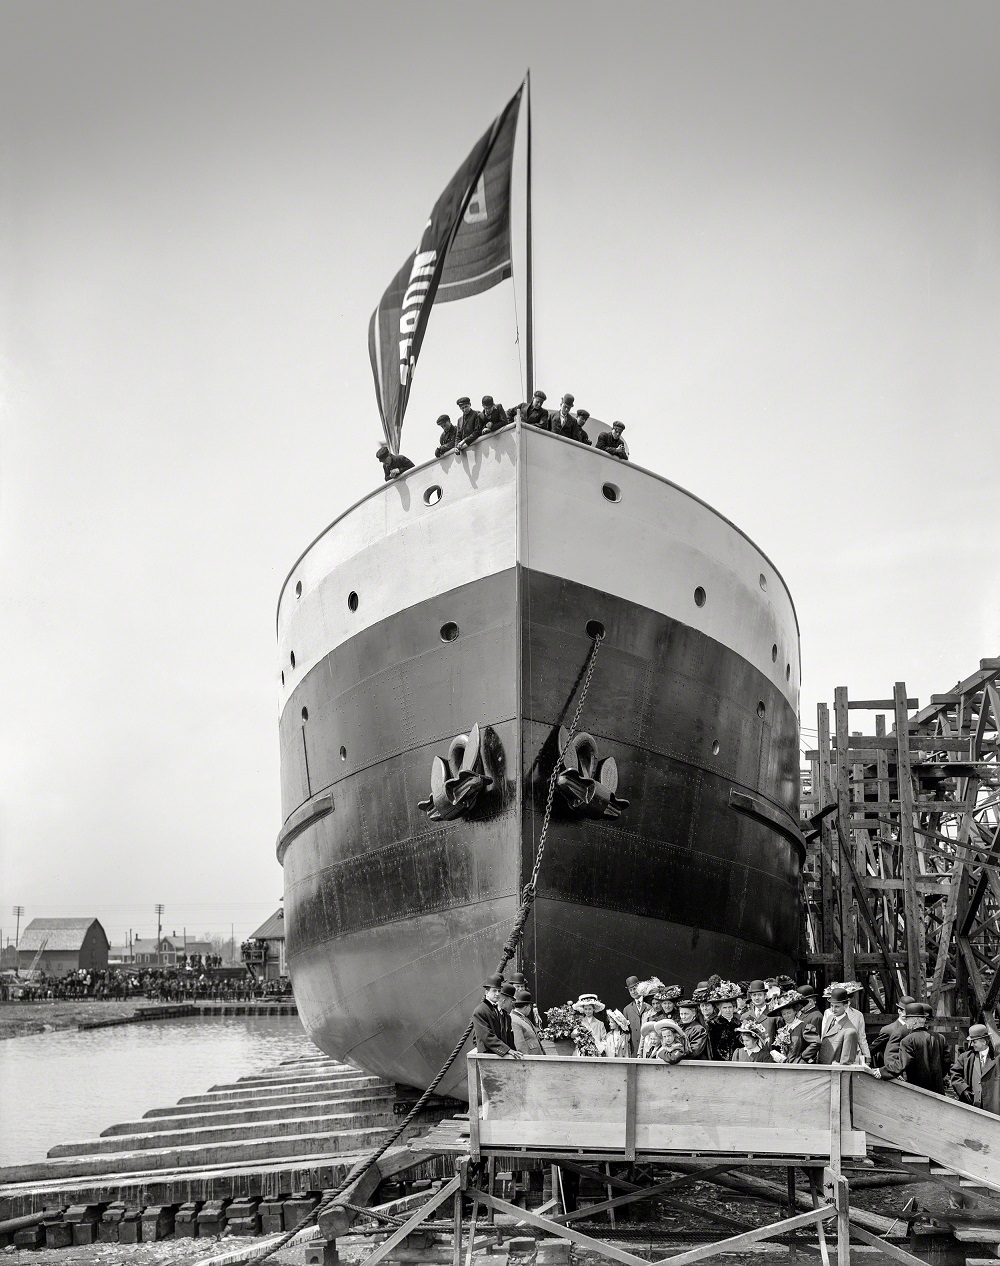 Launching party, freighter Benjamin Noble, Wyandotte, 1909